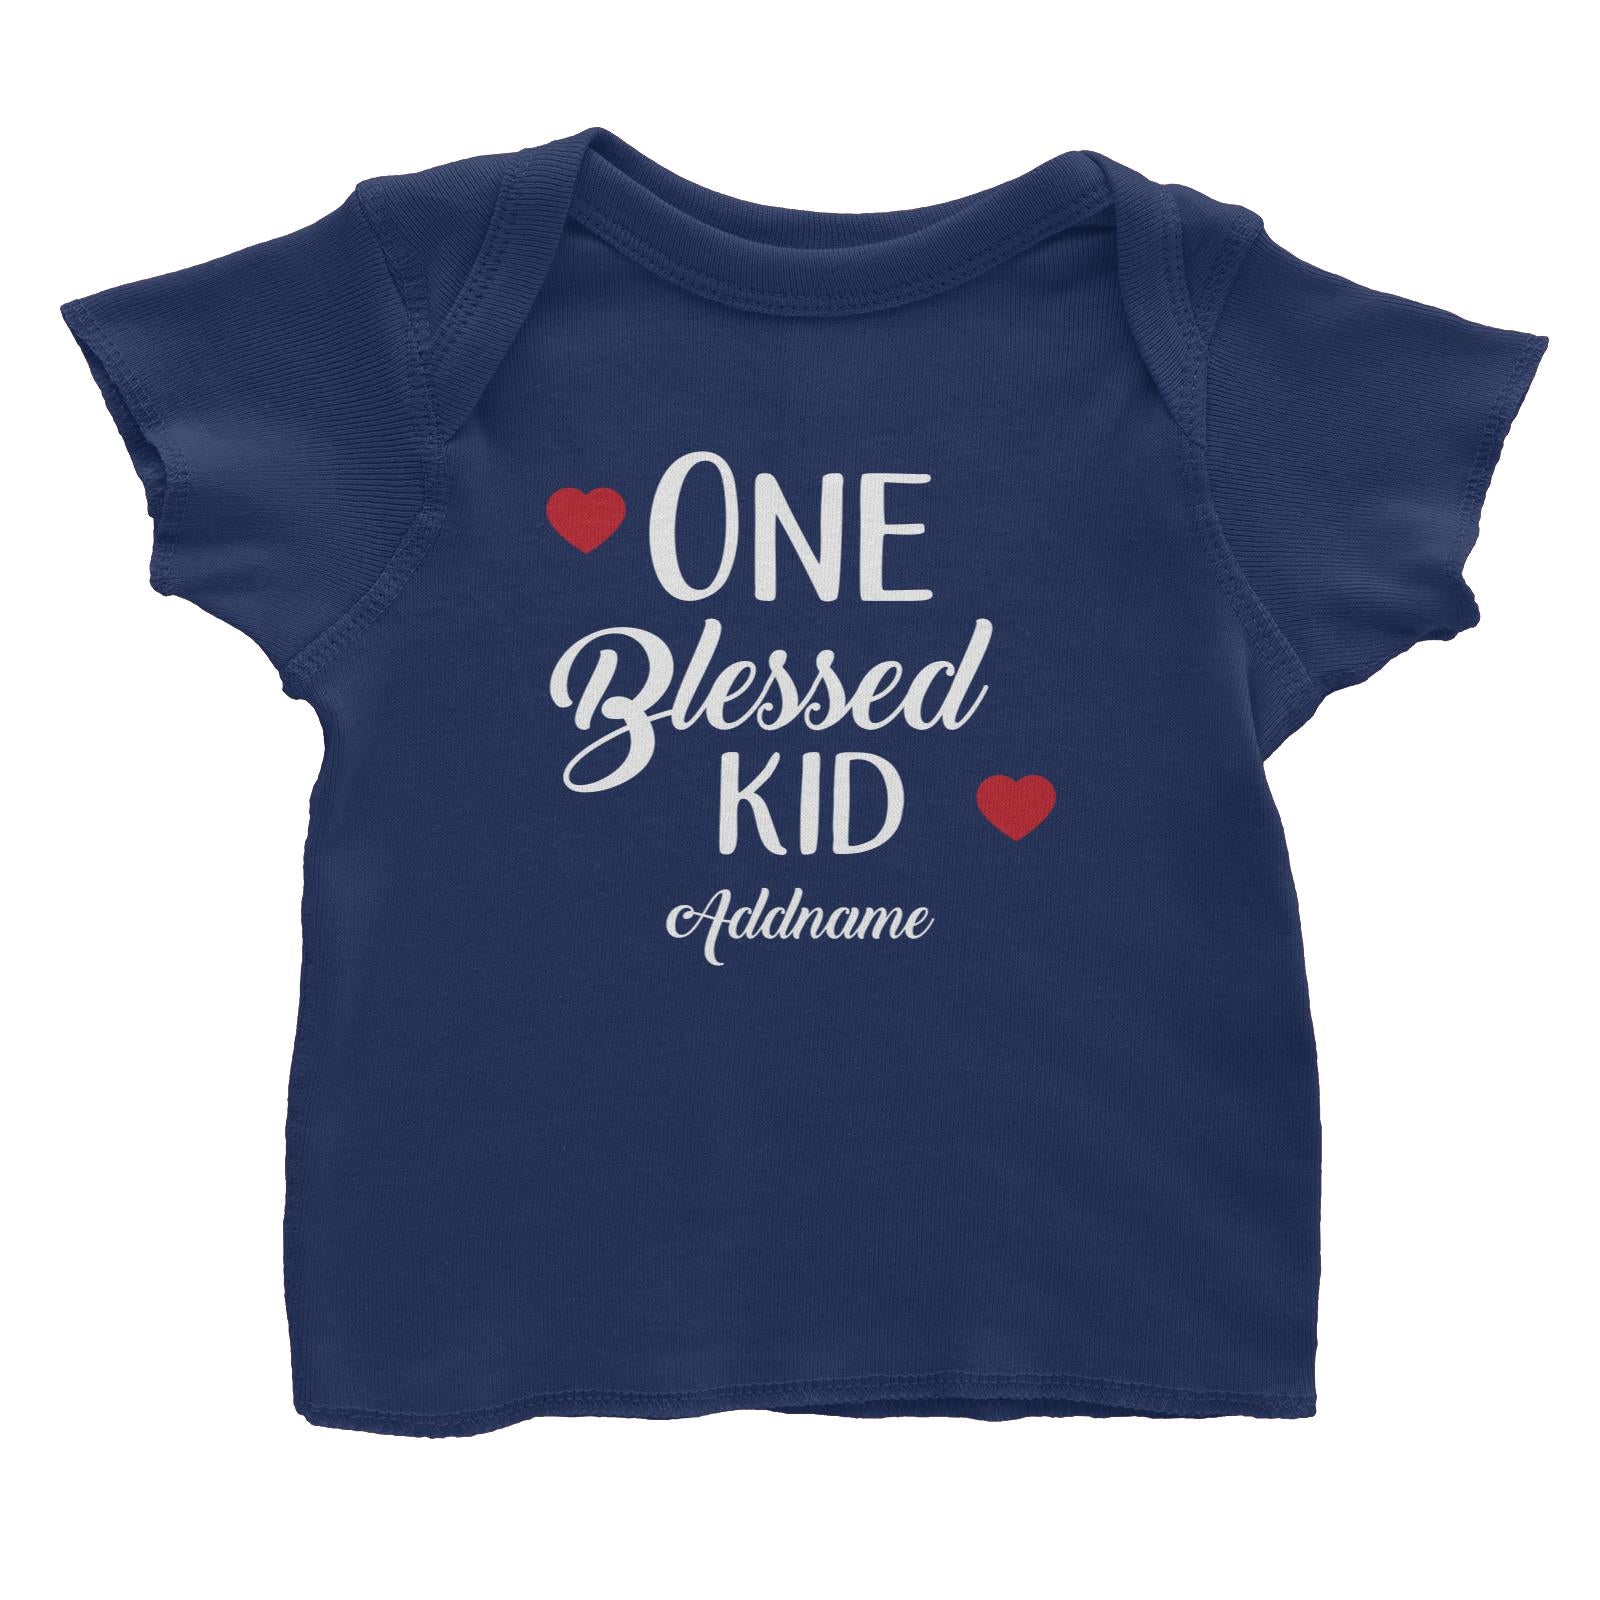 Christian Series One Blessed Kid Addname Baby T-Shirt